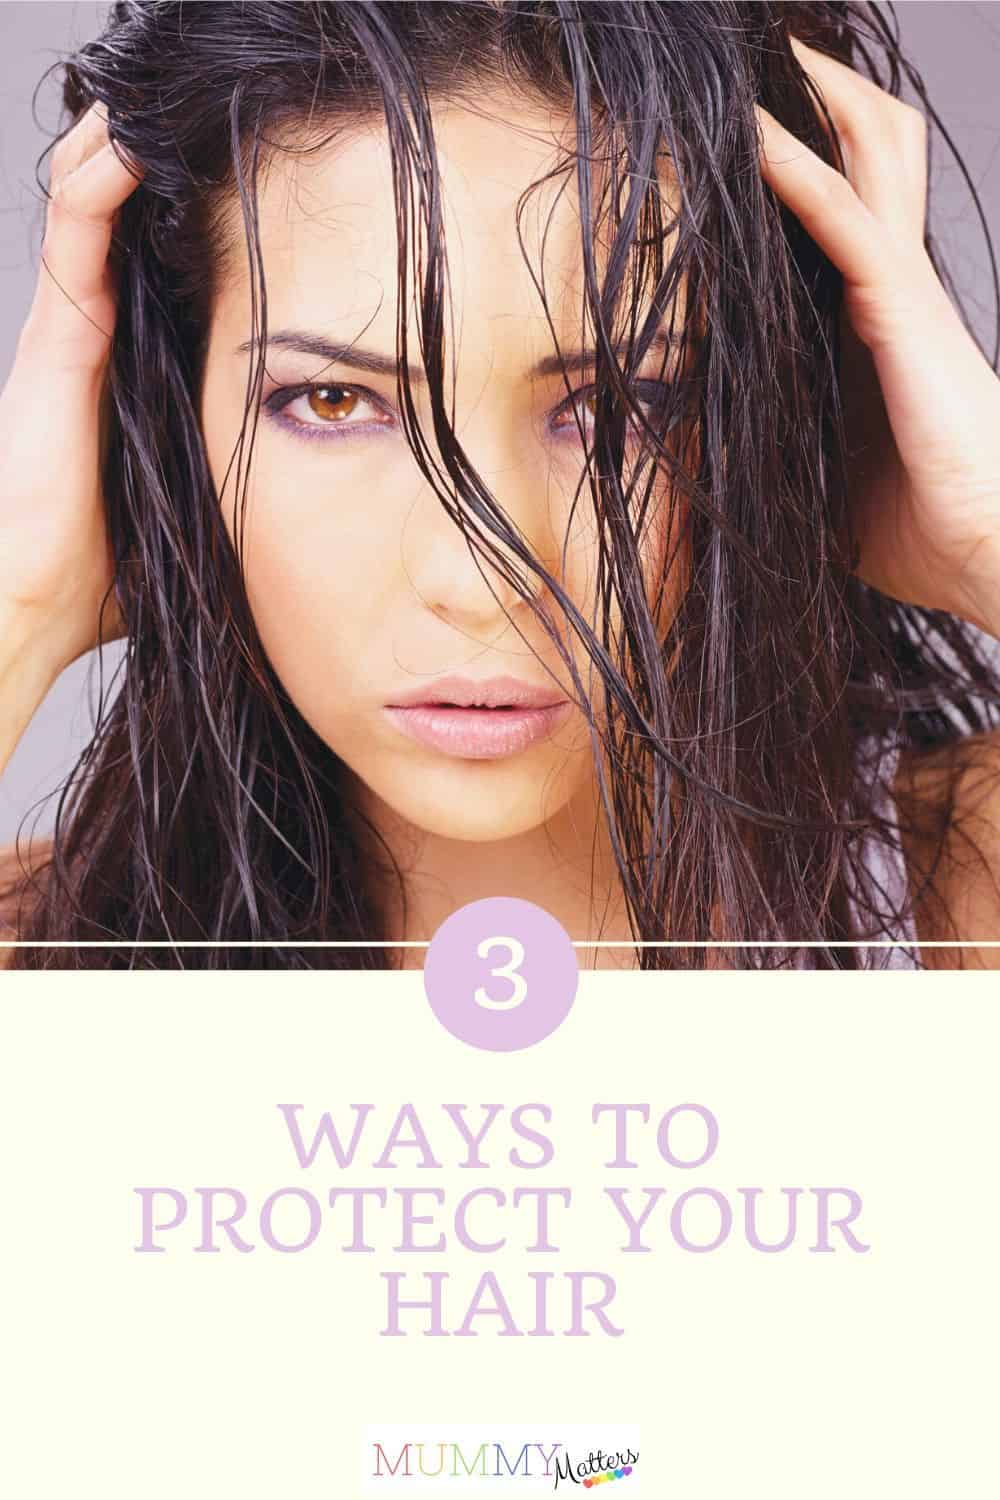 Every day we do things that damage our hair and make it weaker or duller. To keep our hair looking it’s best, here are some hints and tips to protect your hair.